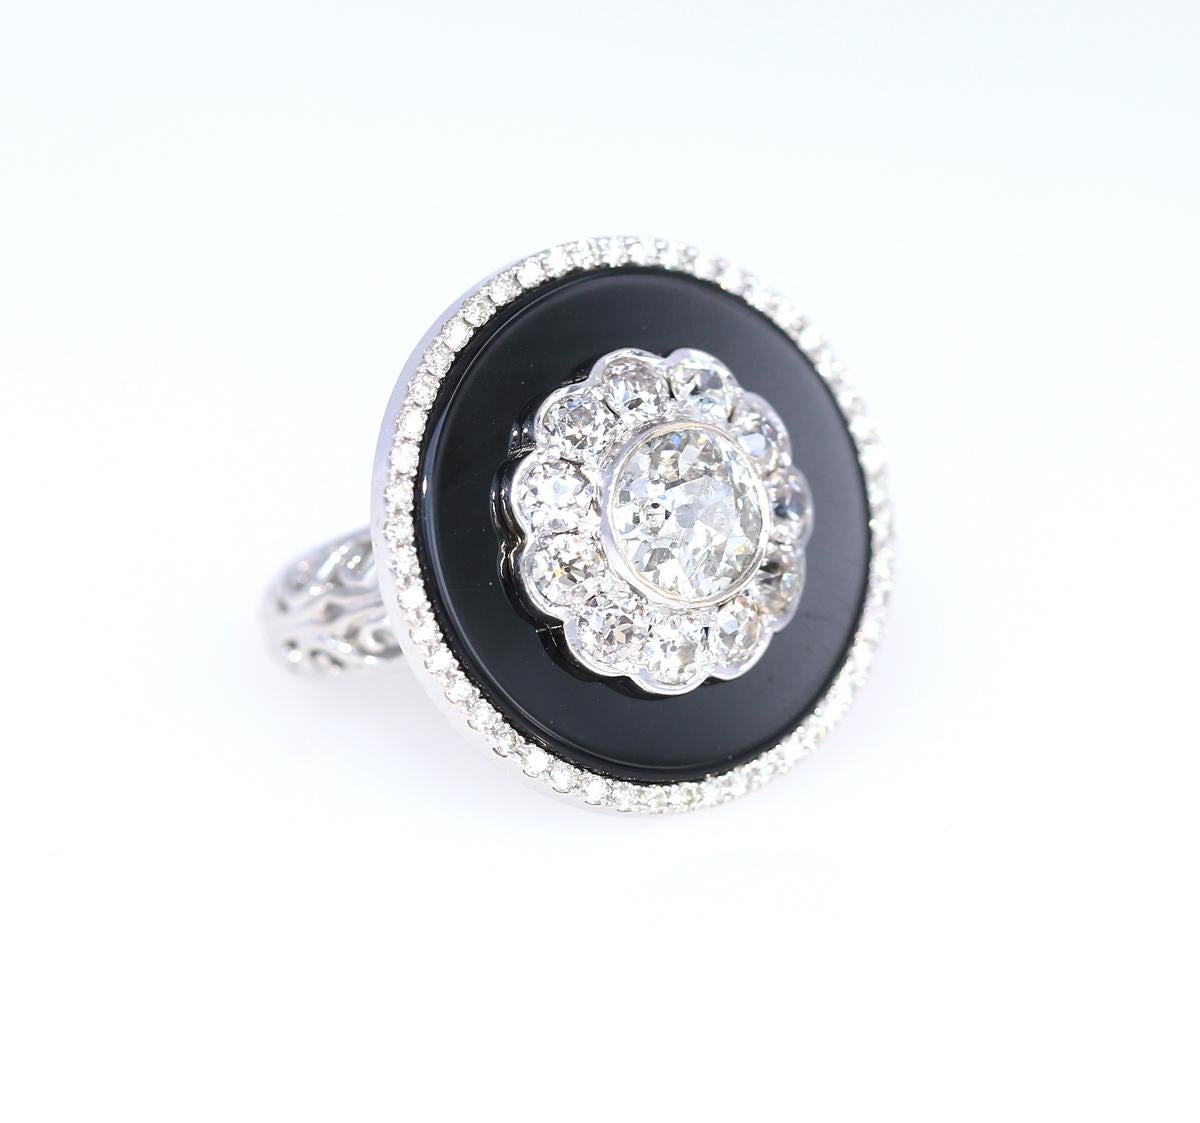 Diamond 2.2 Carat Onyx Ring White Gold Certified, 1930 For Sale 2